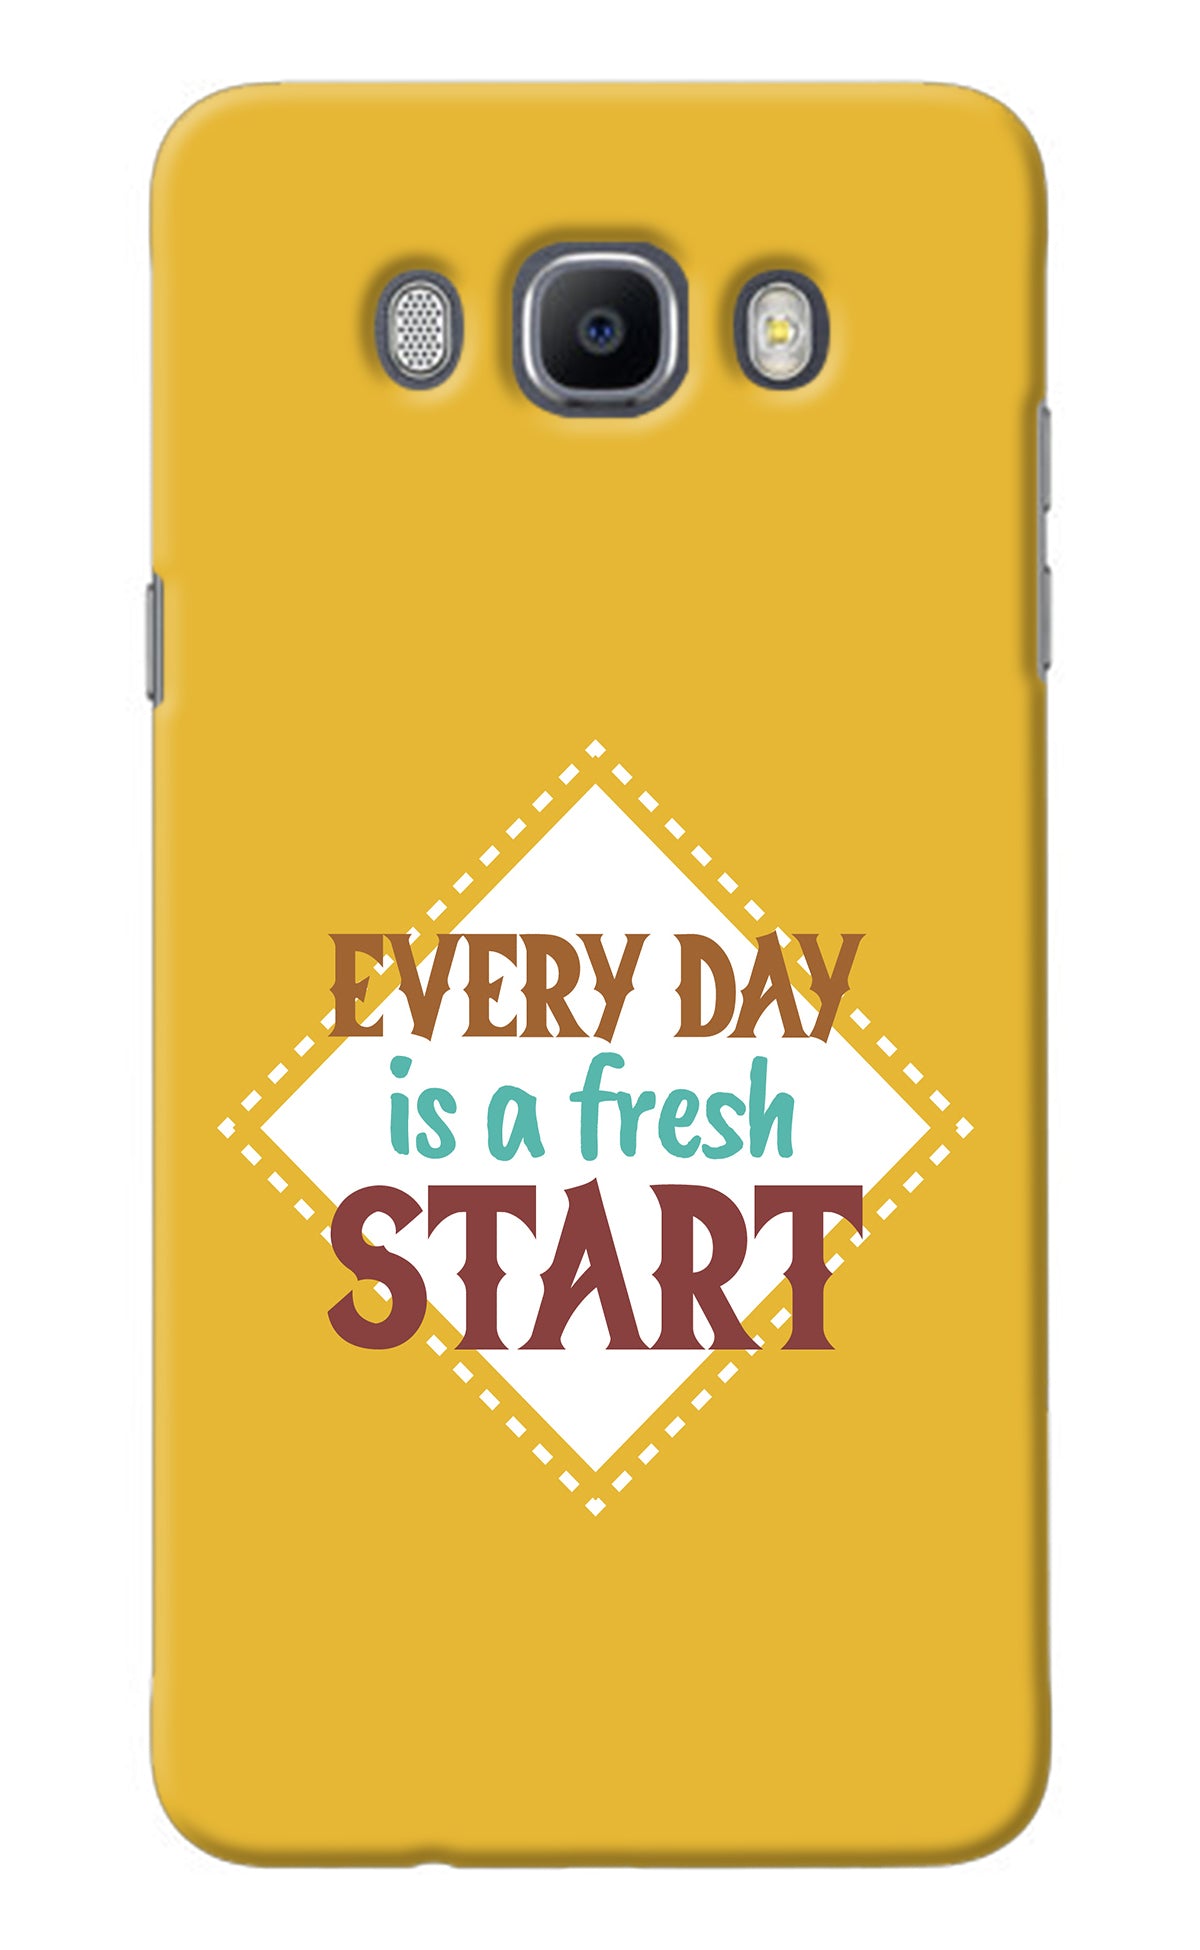 Every day is a Fresh Start Samsung J7 2016 Back Cover